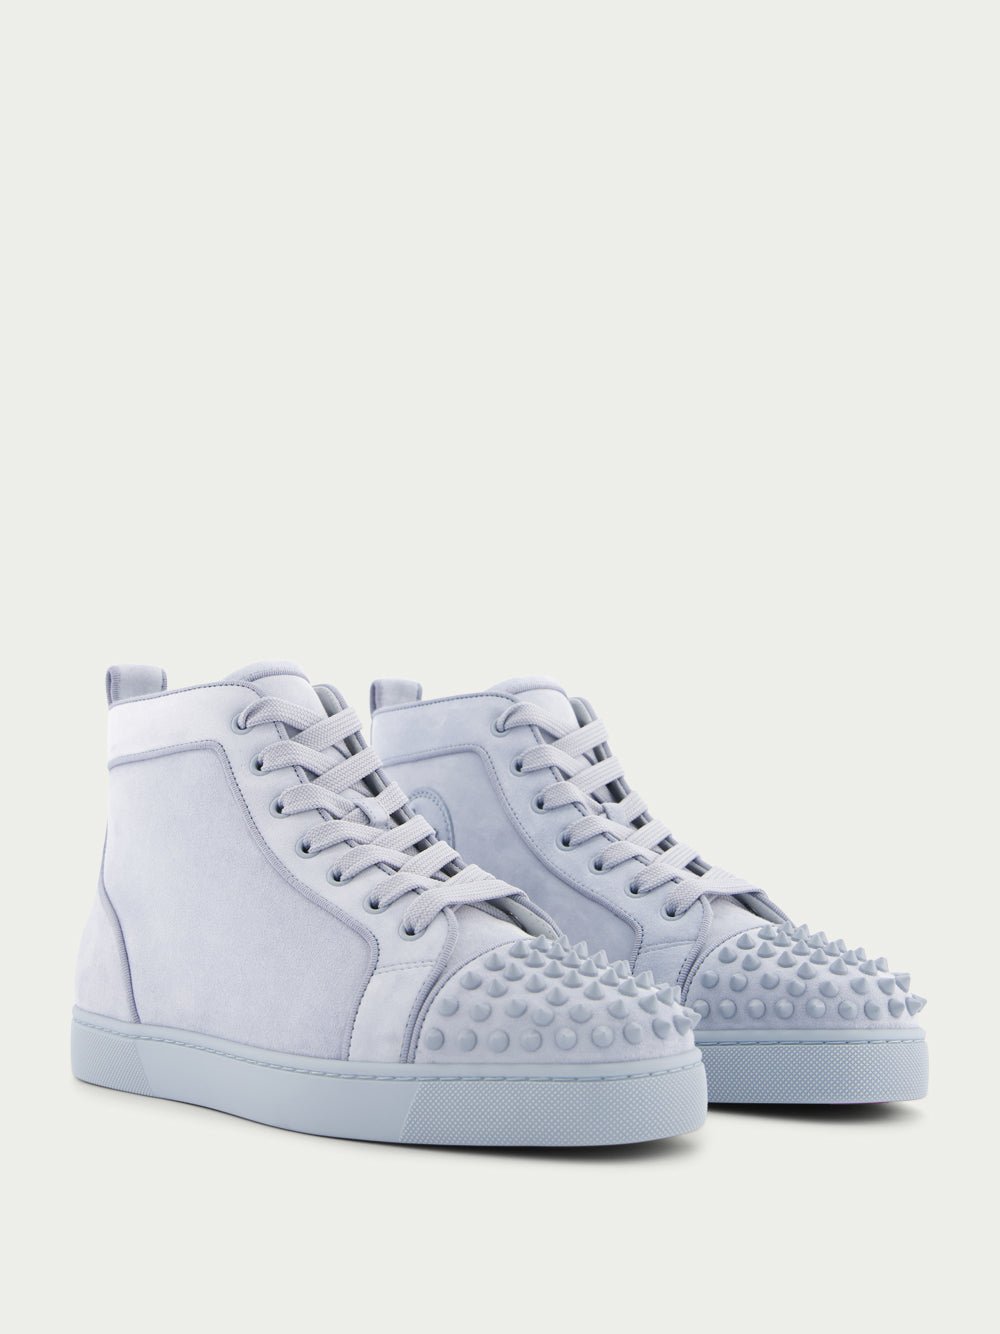 Christian LouboutinLou Spikes high-top veau velours sneakers at Fashion Clinic